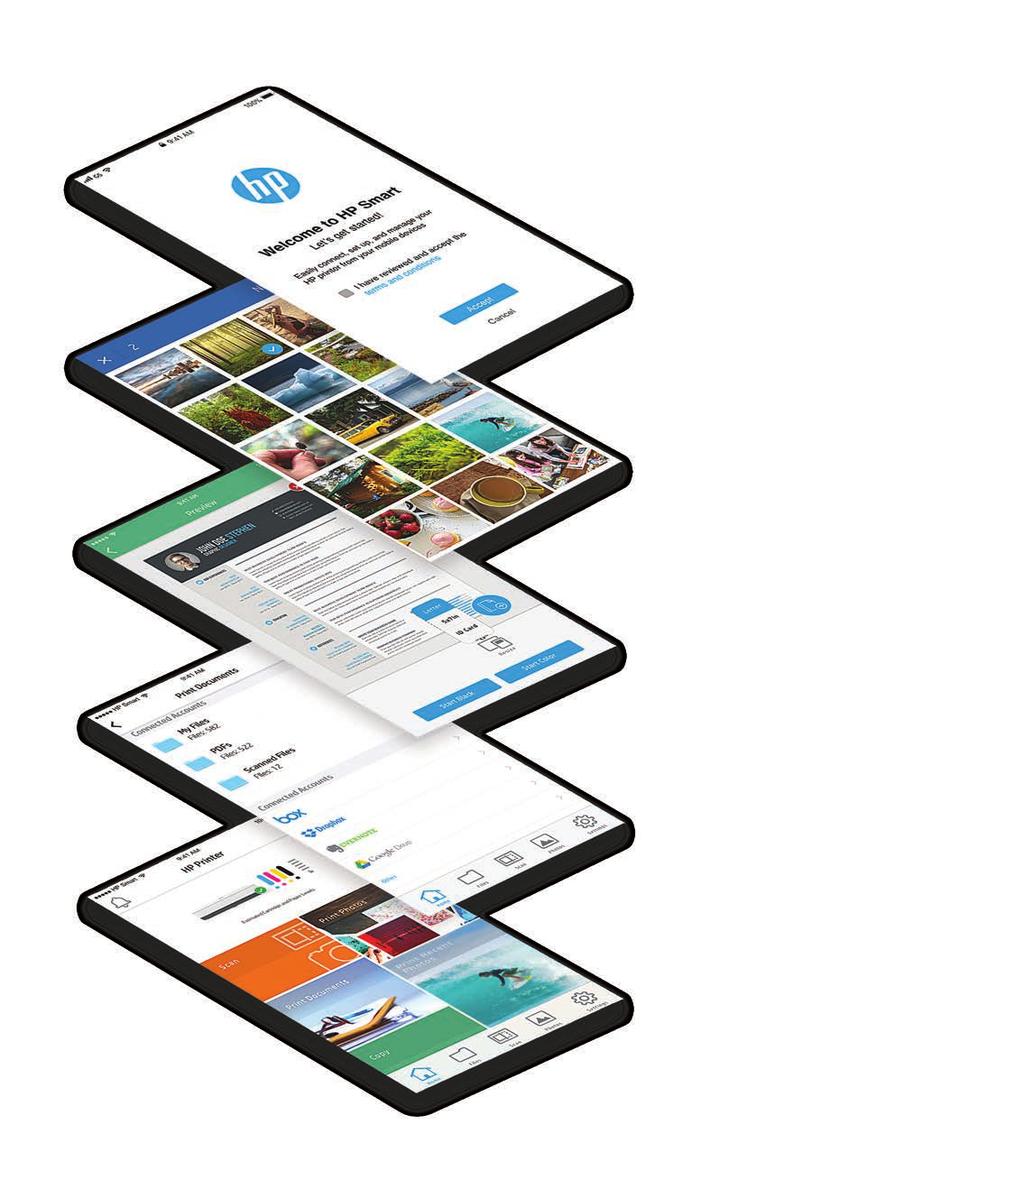 HP Smart app The power of your printer in the palm of your hand Whether you re at work and need to print directly to your home printer or you need a quick and easy way to print photos from social